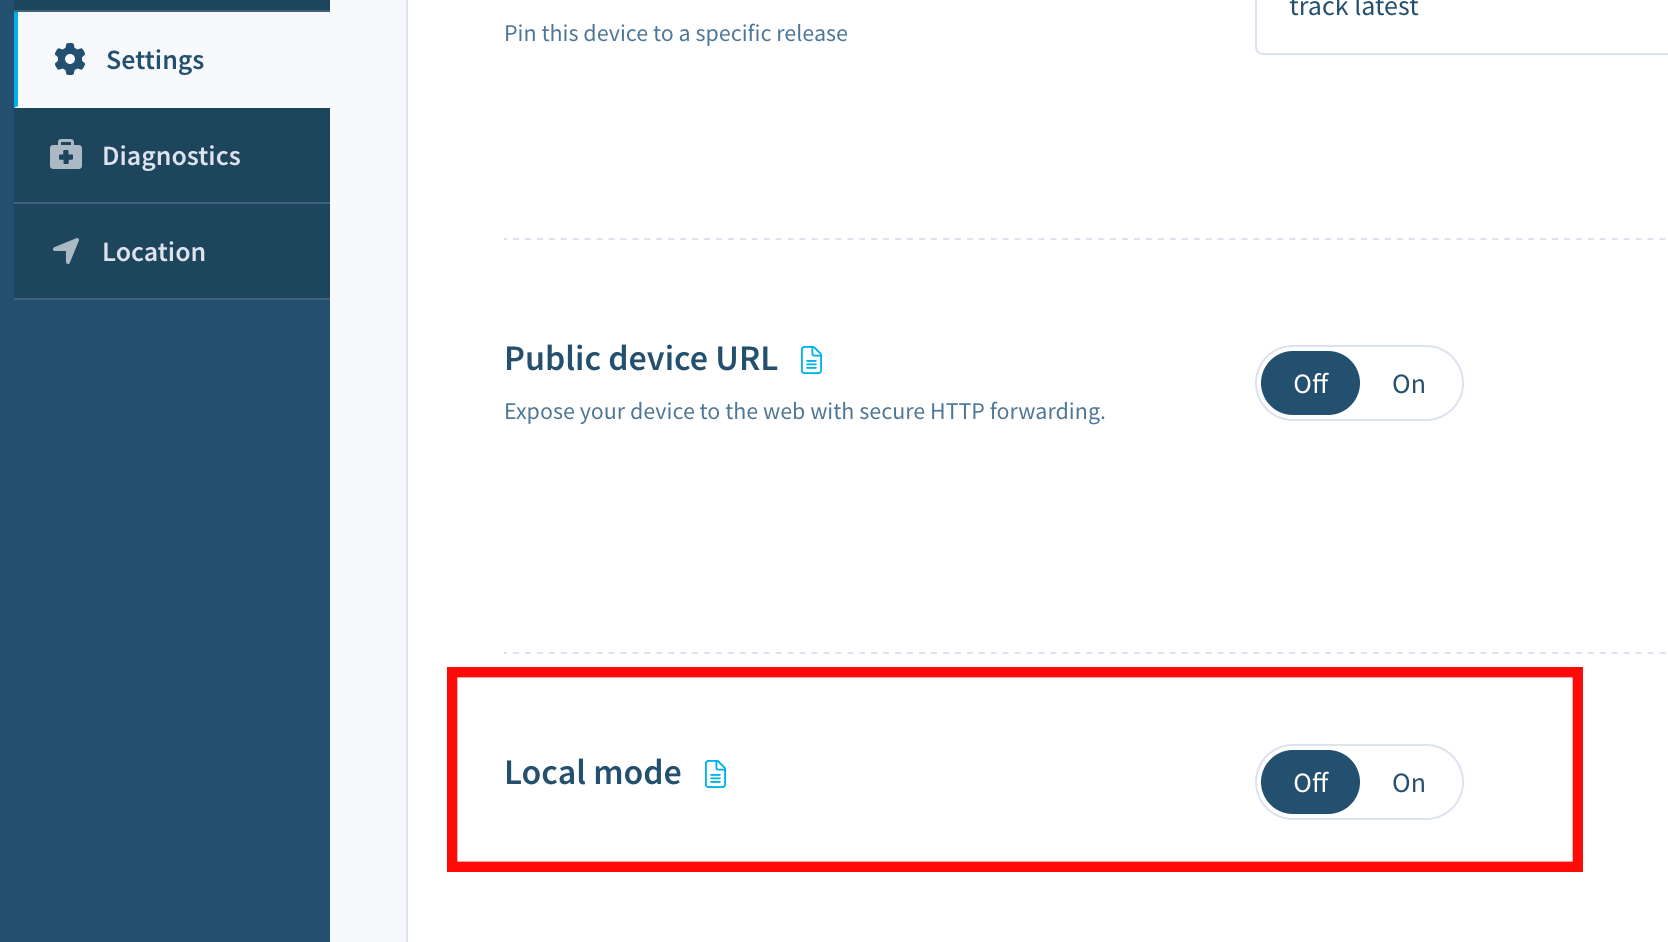 Enable Local Mode